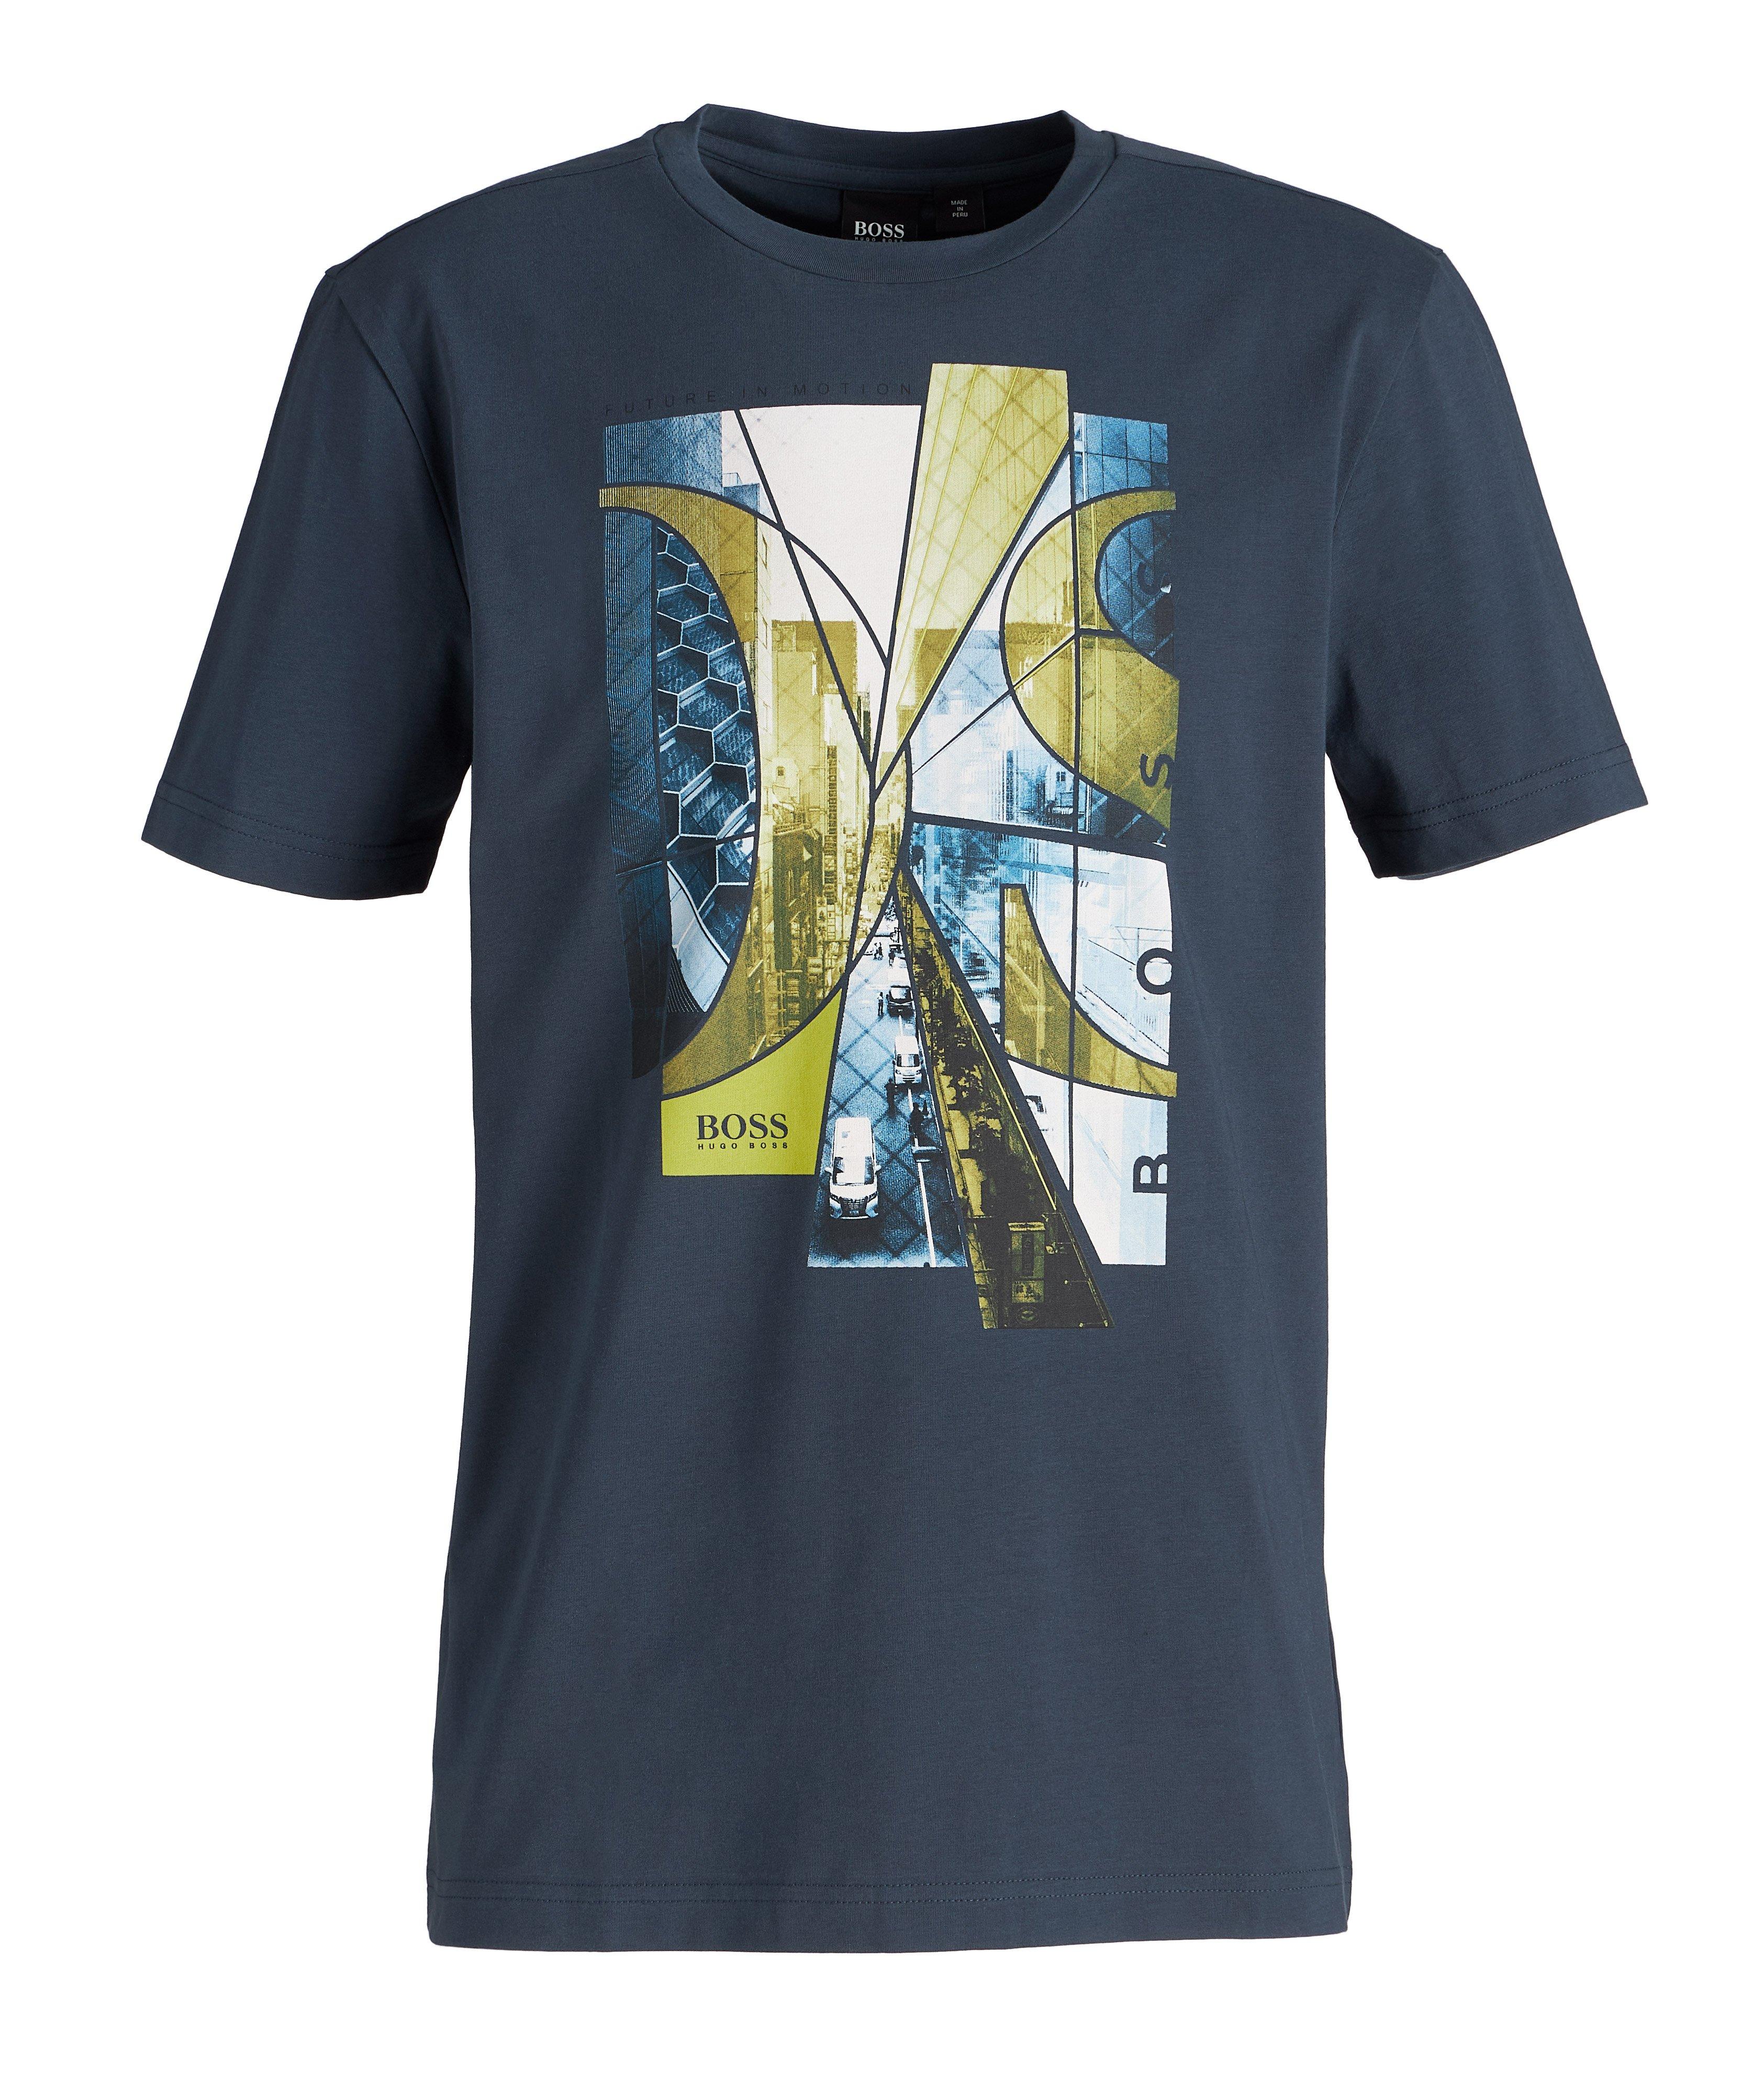 City Streets Printed Cotton-Blend T-Shirt image 0